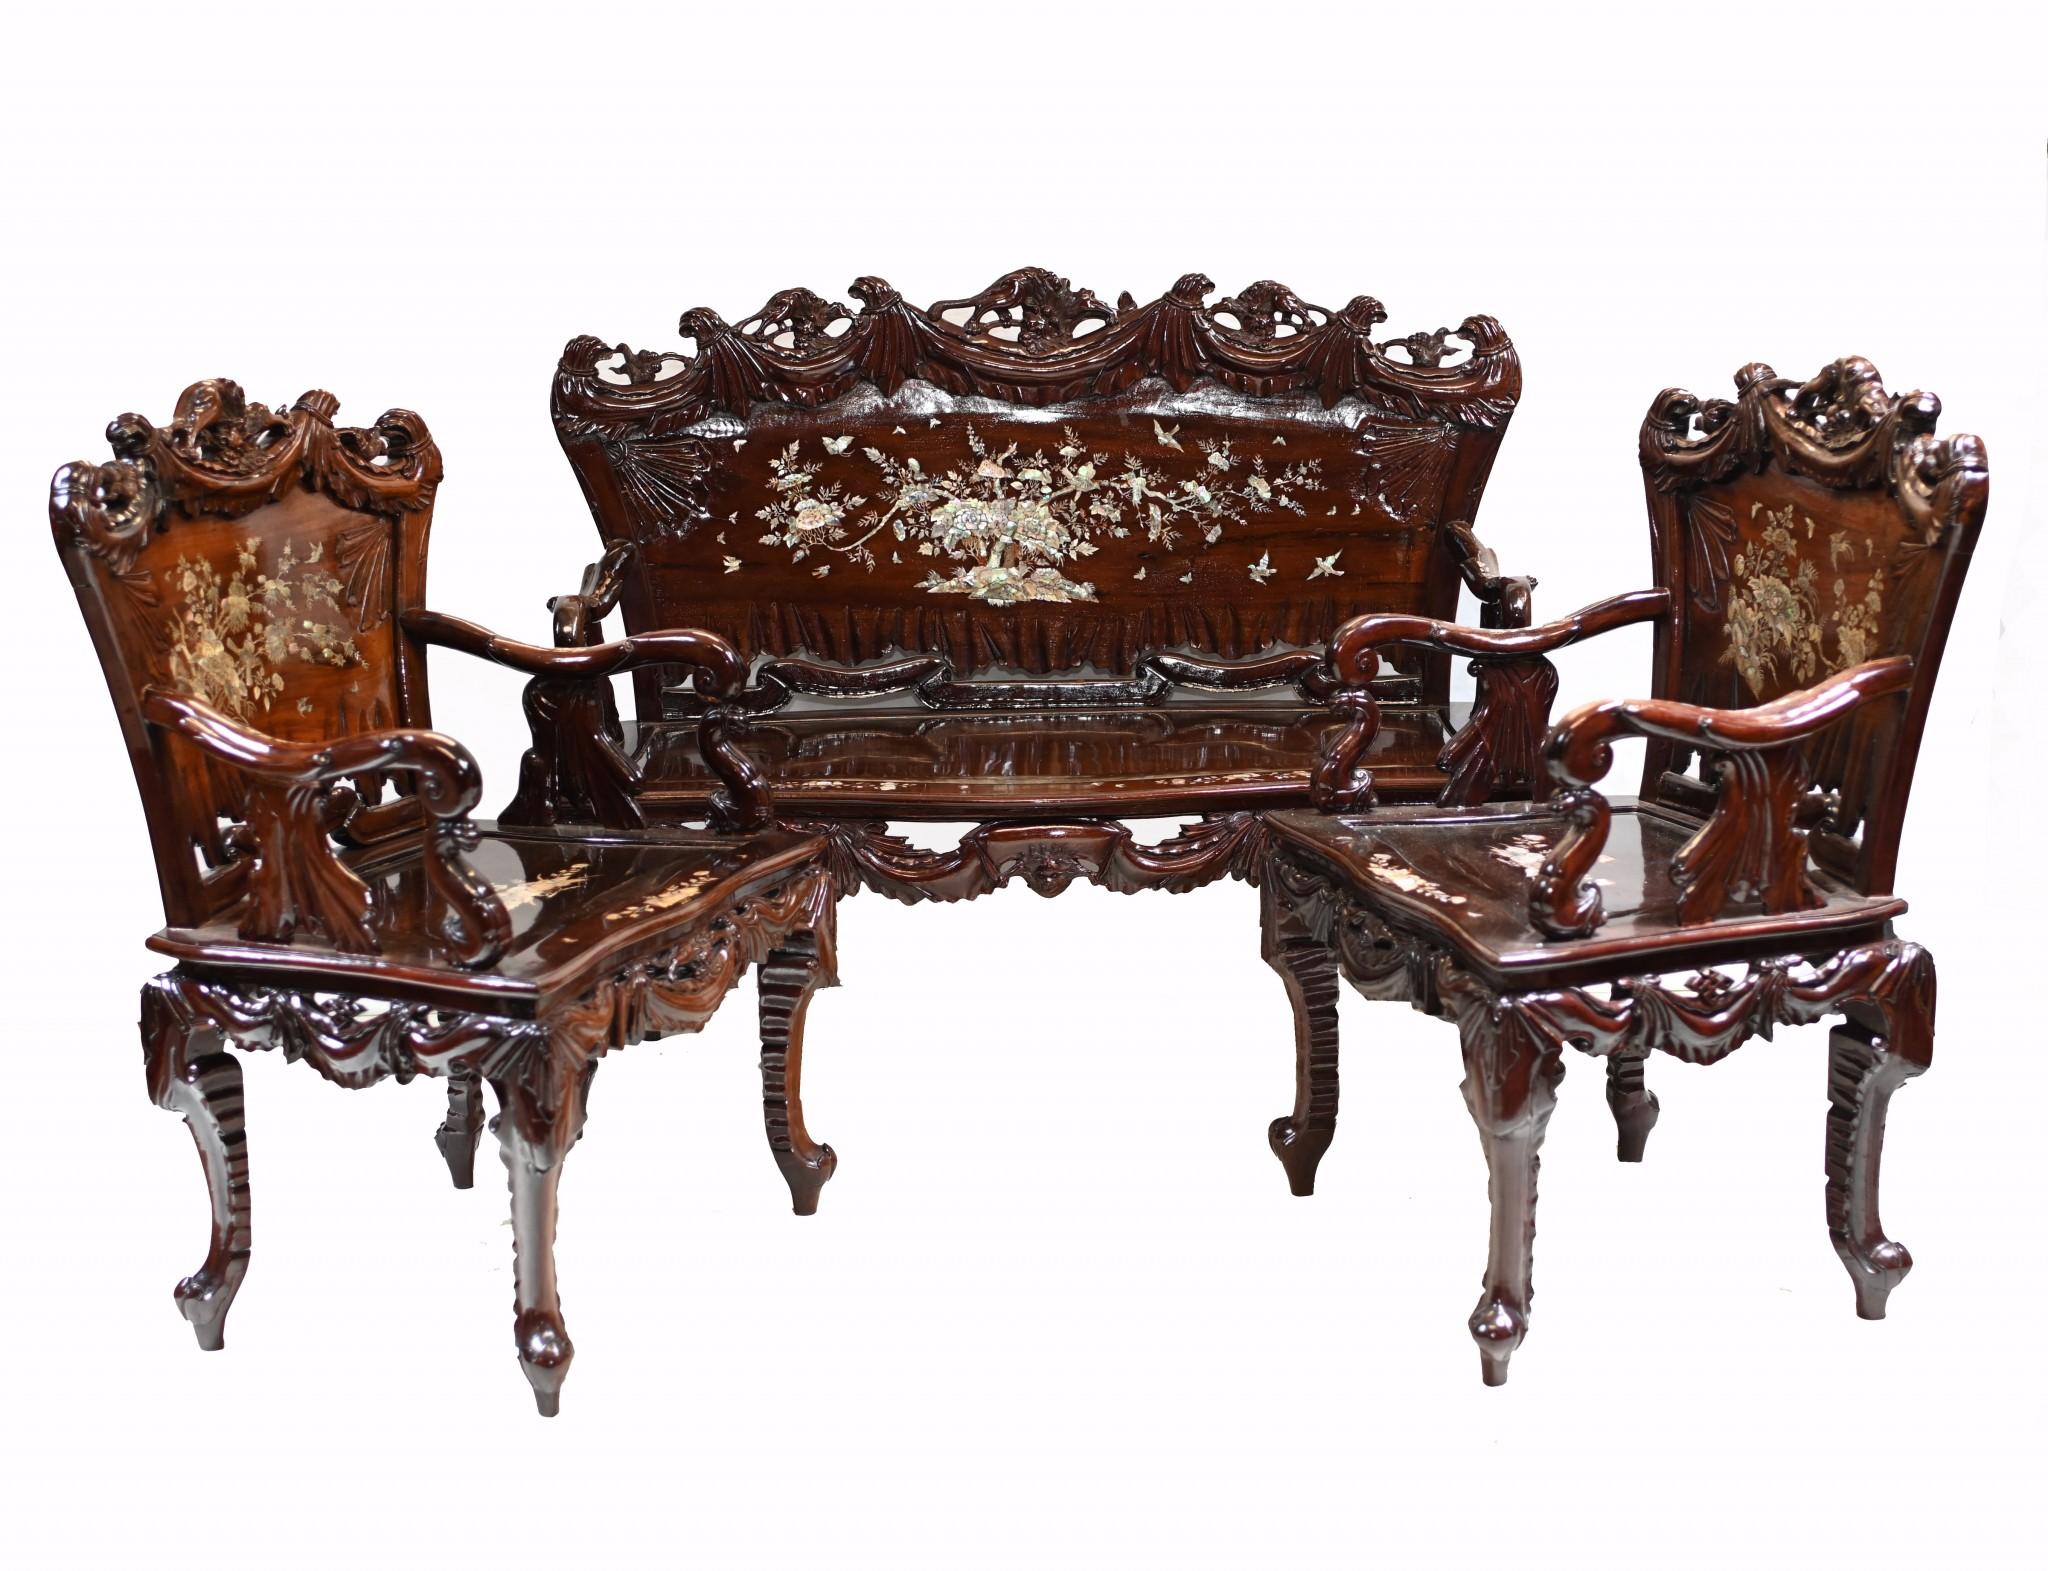 Early 20th Century Chinese Hardwood Bench and Chair Set Suite Mother of Pearl 1900